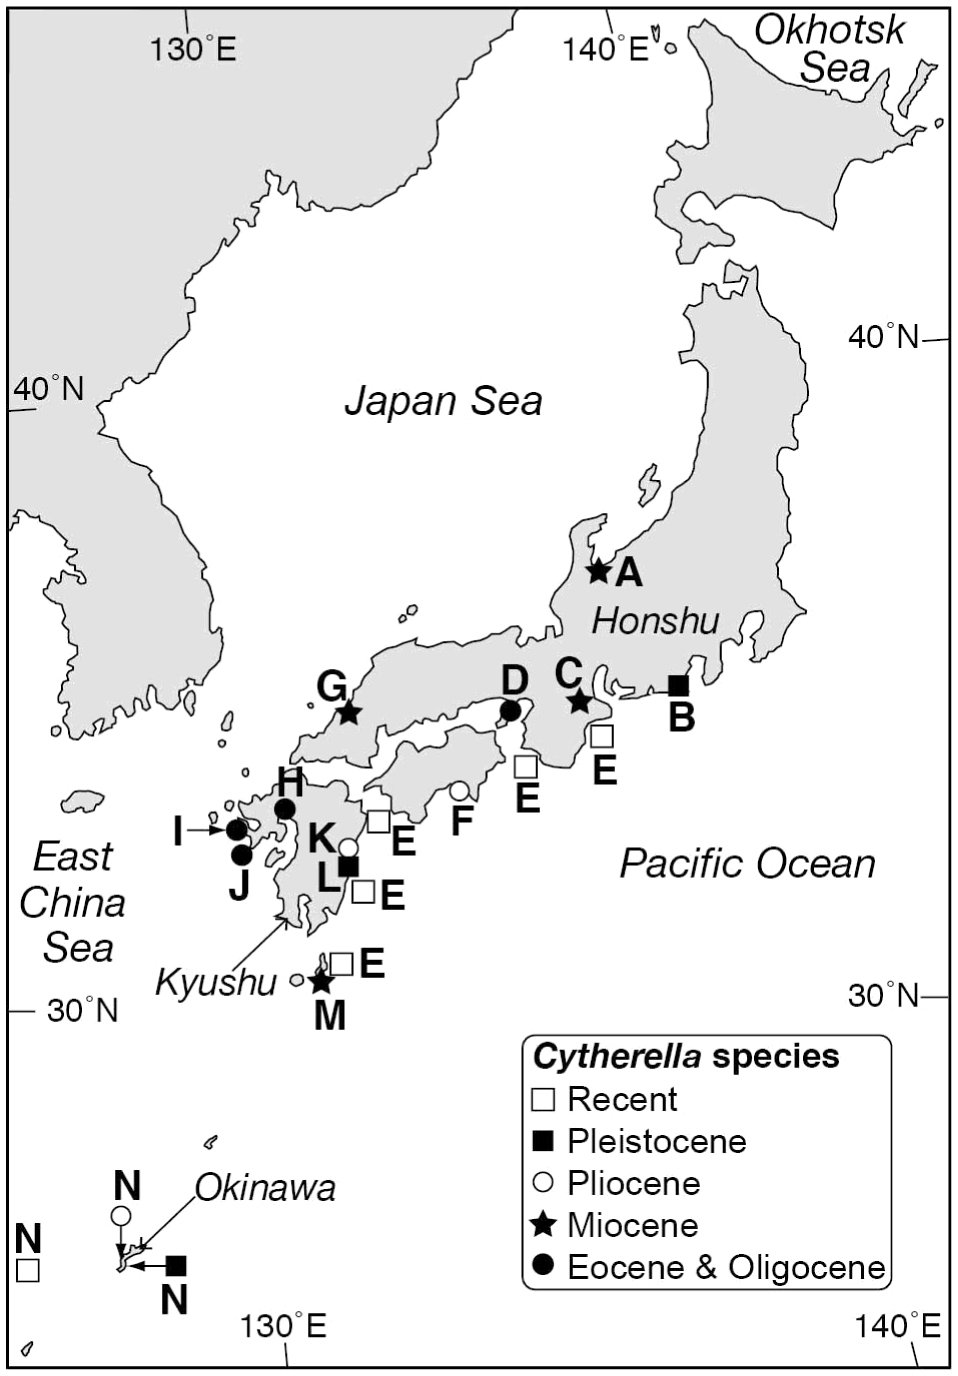 Early to Middle Miocene Ostracods from the Yatsuo Group, Central Japan:  Significance for the Bathyal Fauna between Japan Sea and Northwest Pacific  Ocean During the Back-Arc Spreading